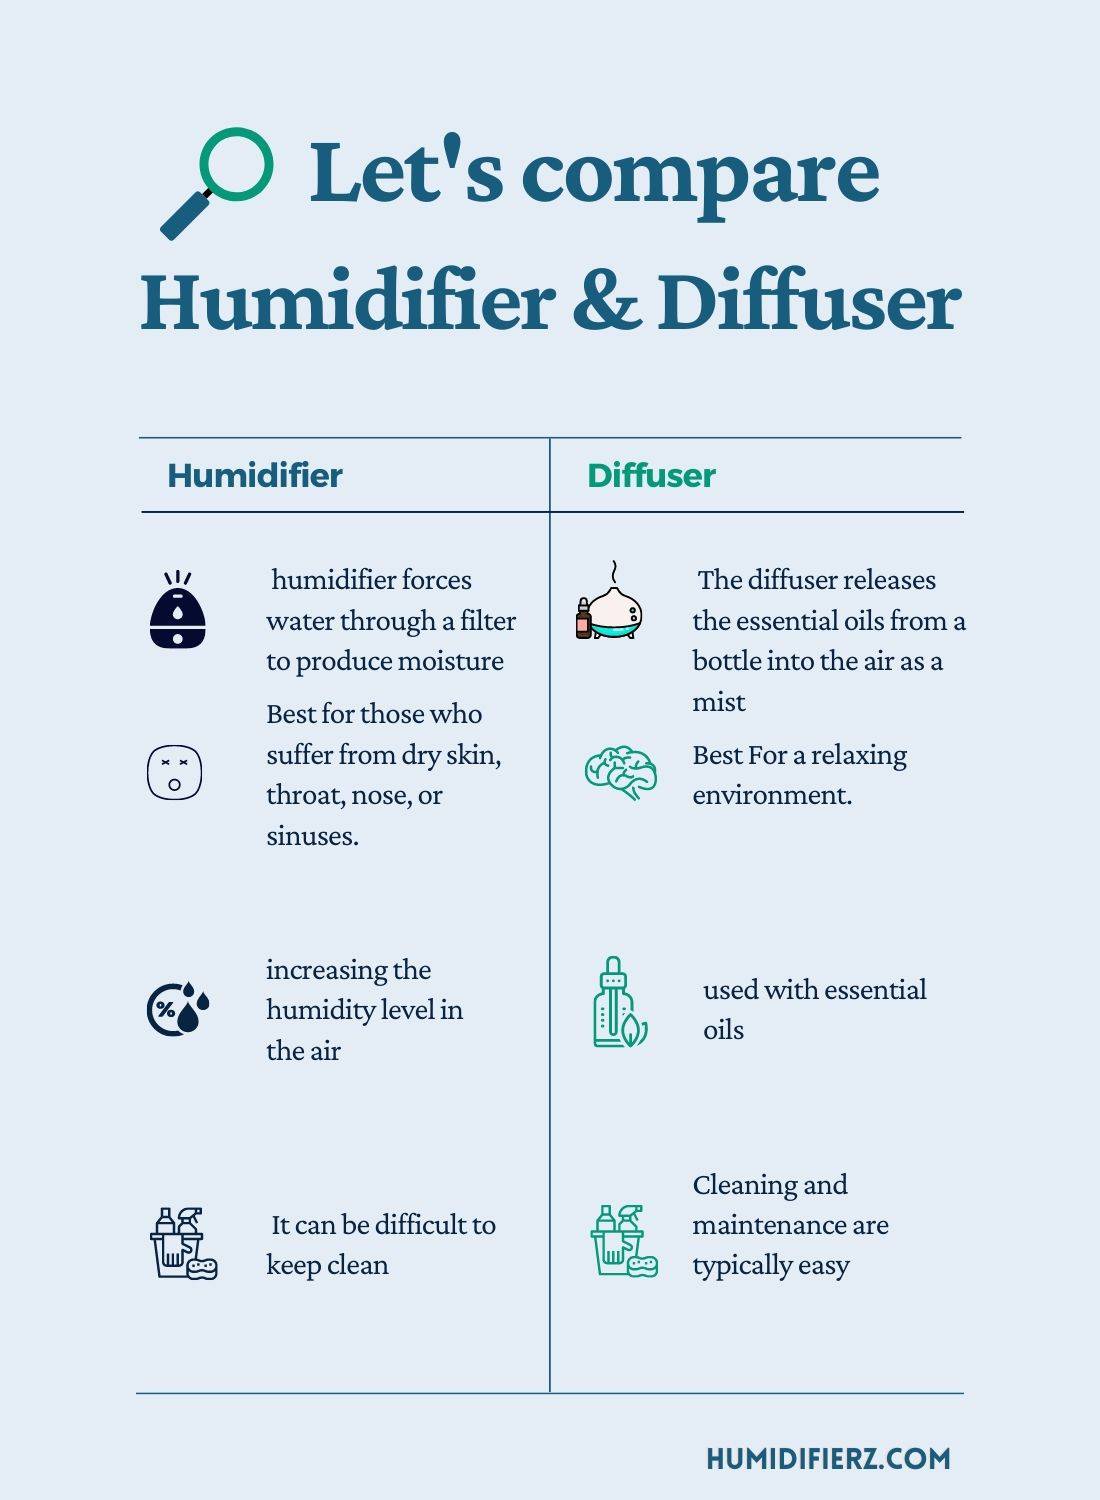 Humidifier vs Diffuser – Which One Is Better for Diffusing Essential Oils?